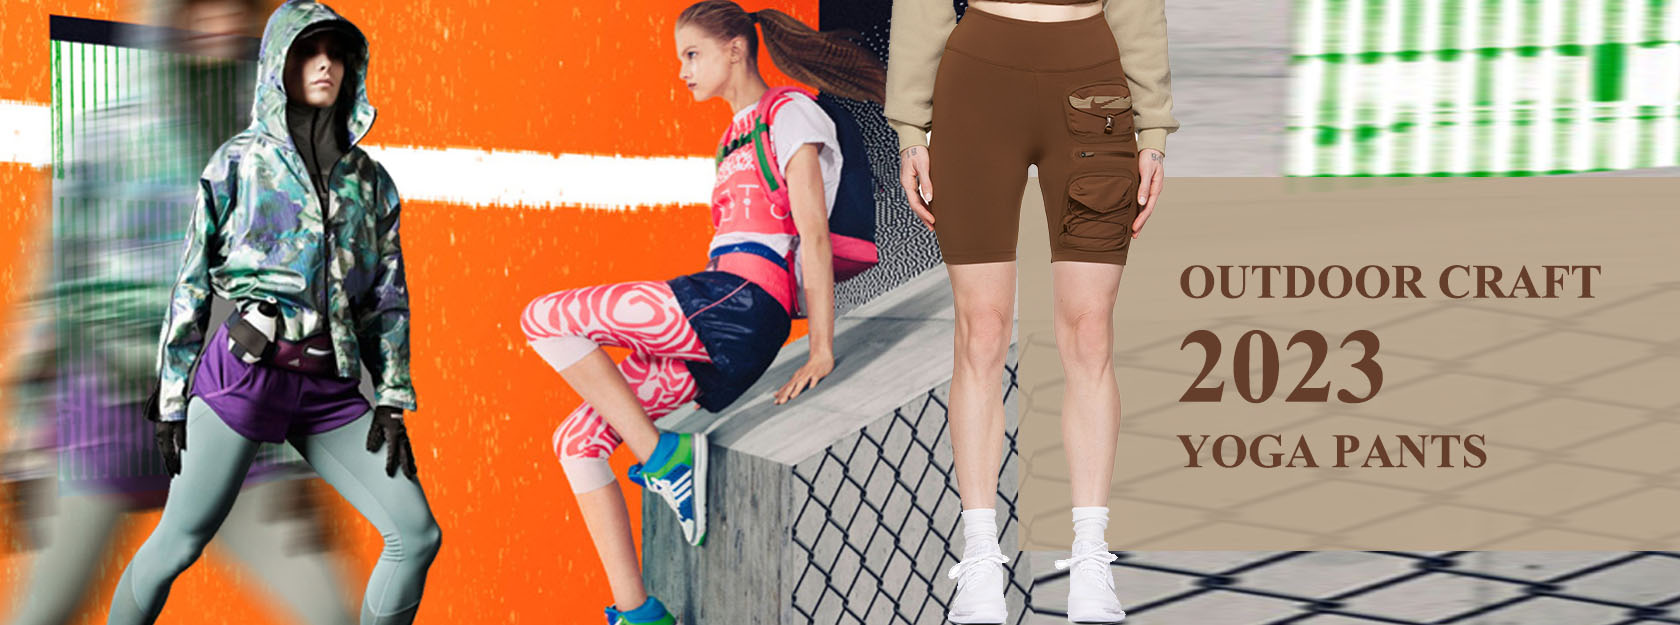 7 of the most well-liked yoga pants craft design trends for 2023